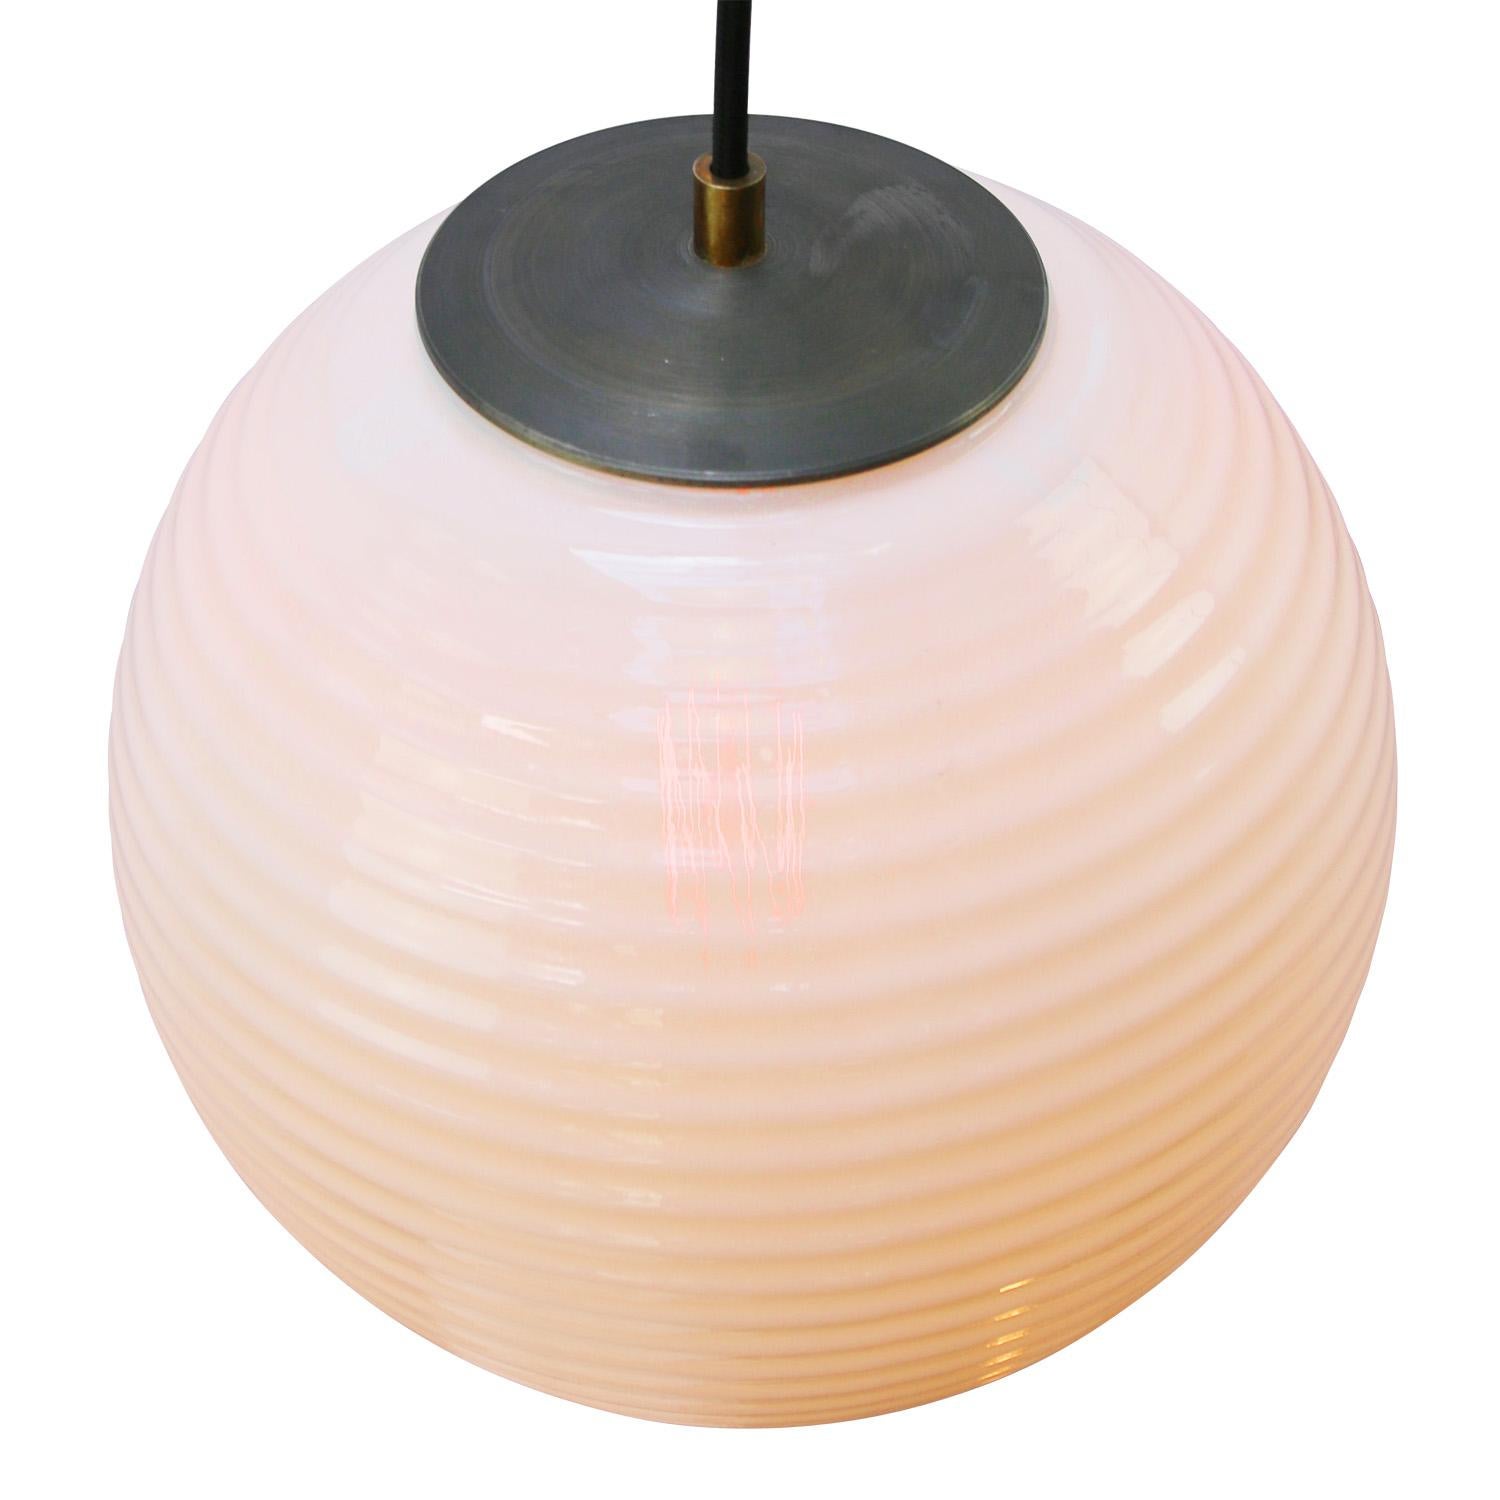 Opaline glass pendant.
2 meter Black wire

Weight: 2.00 kg / 4.4 lb

Priced per individual item. All lamps have been made suitable by international standards for incandescent light bulbs, energy-efficient and LED bulbs. E26/E27 bulb holders and